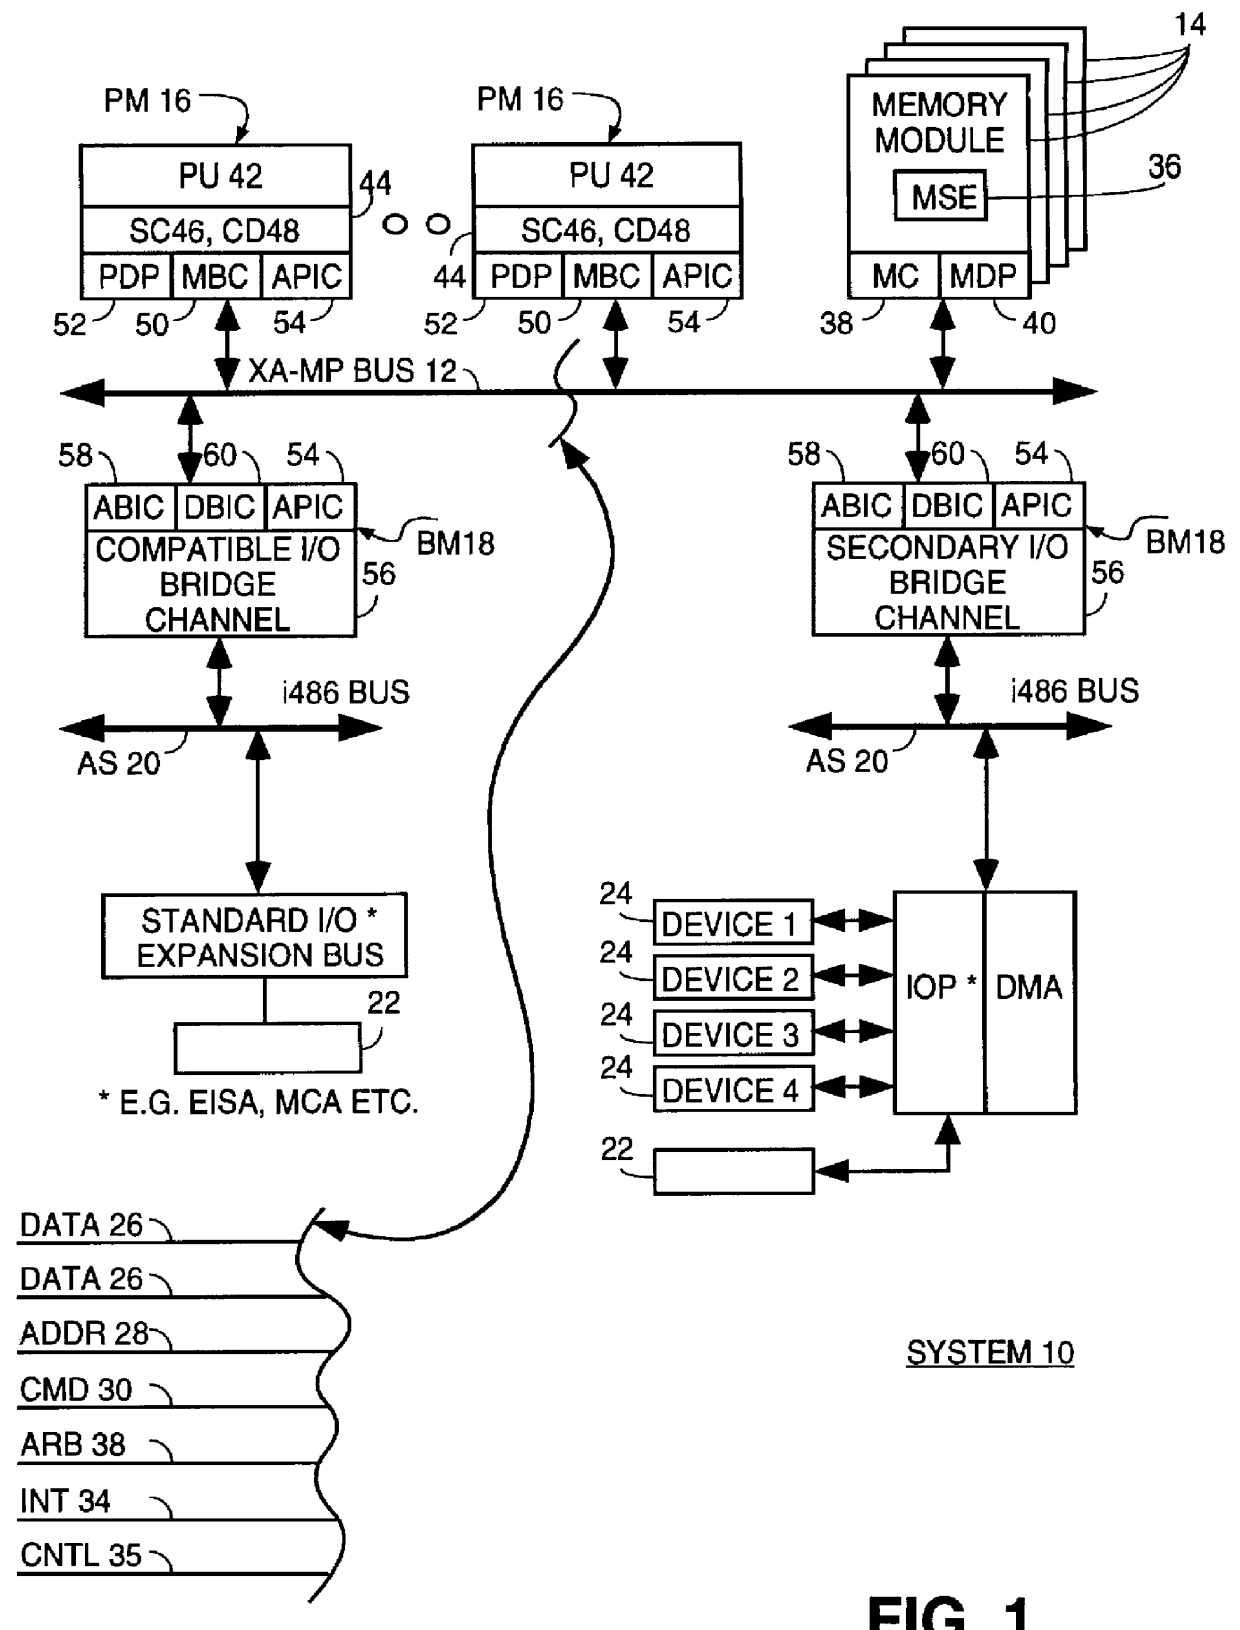 Symmetric multiprocessing system with unified environment and distributed system functions